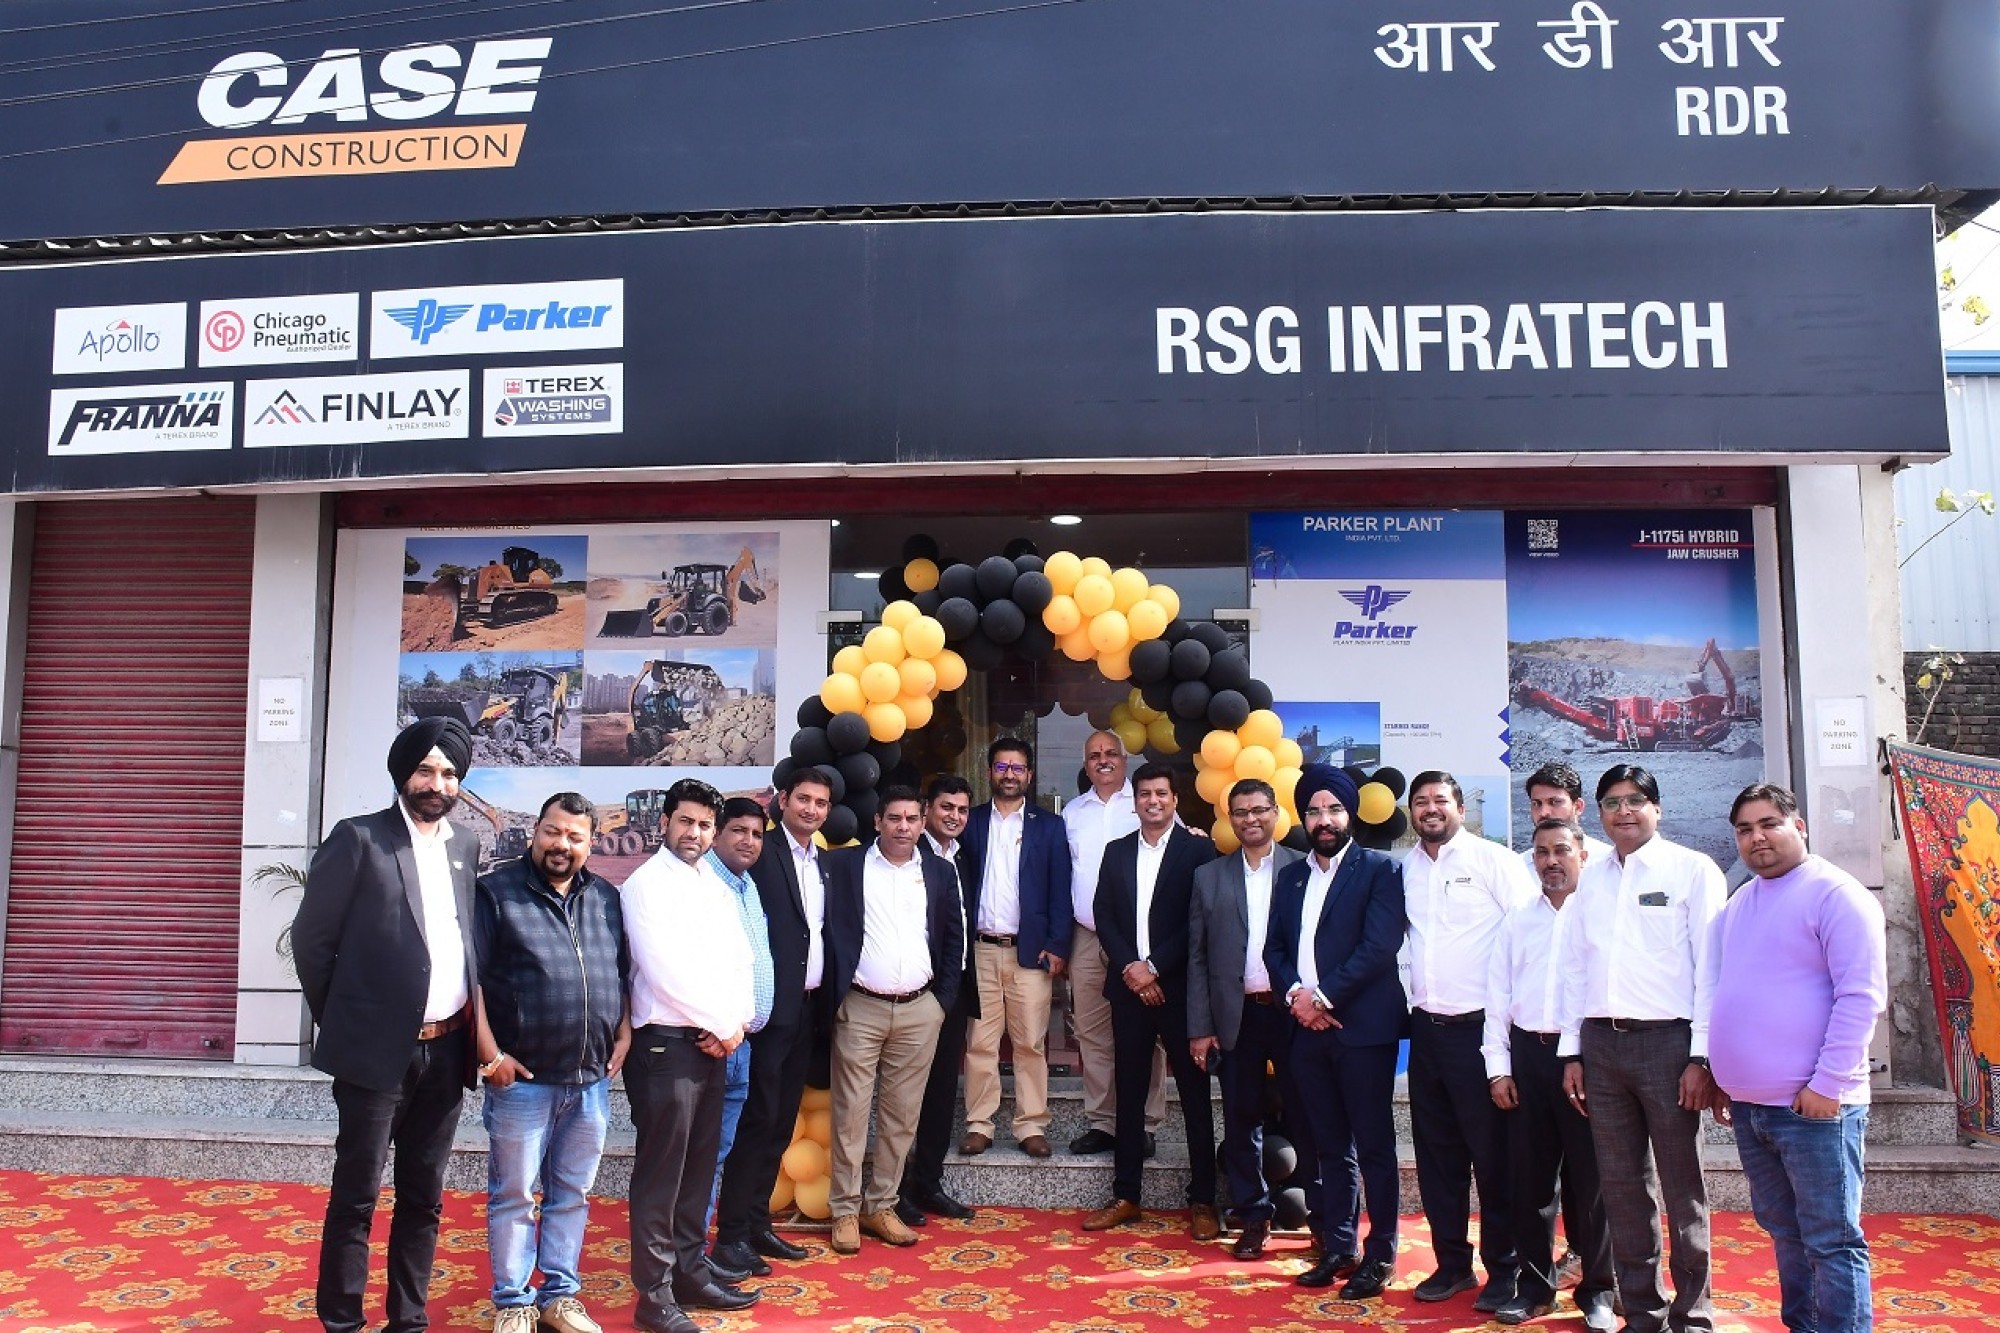 CASE Construction Equipment, a division of CNH, is expanding its footprint in Rajasthan with the appointment of a new dealer partner, RDR Techsol, in Jaipur.